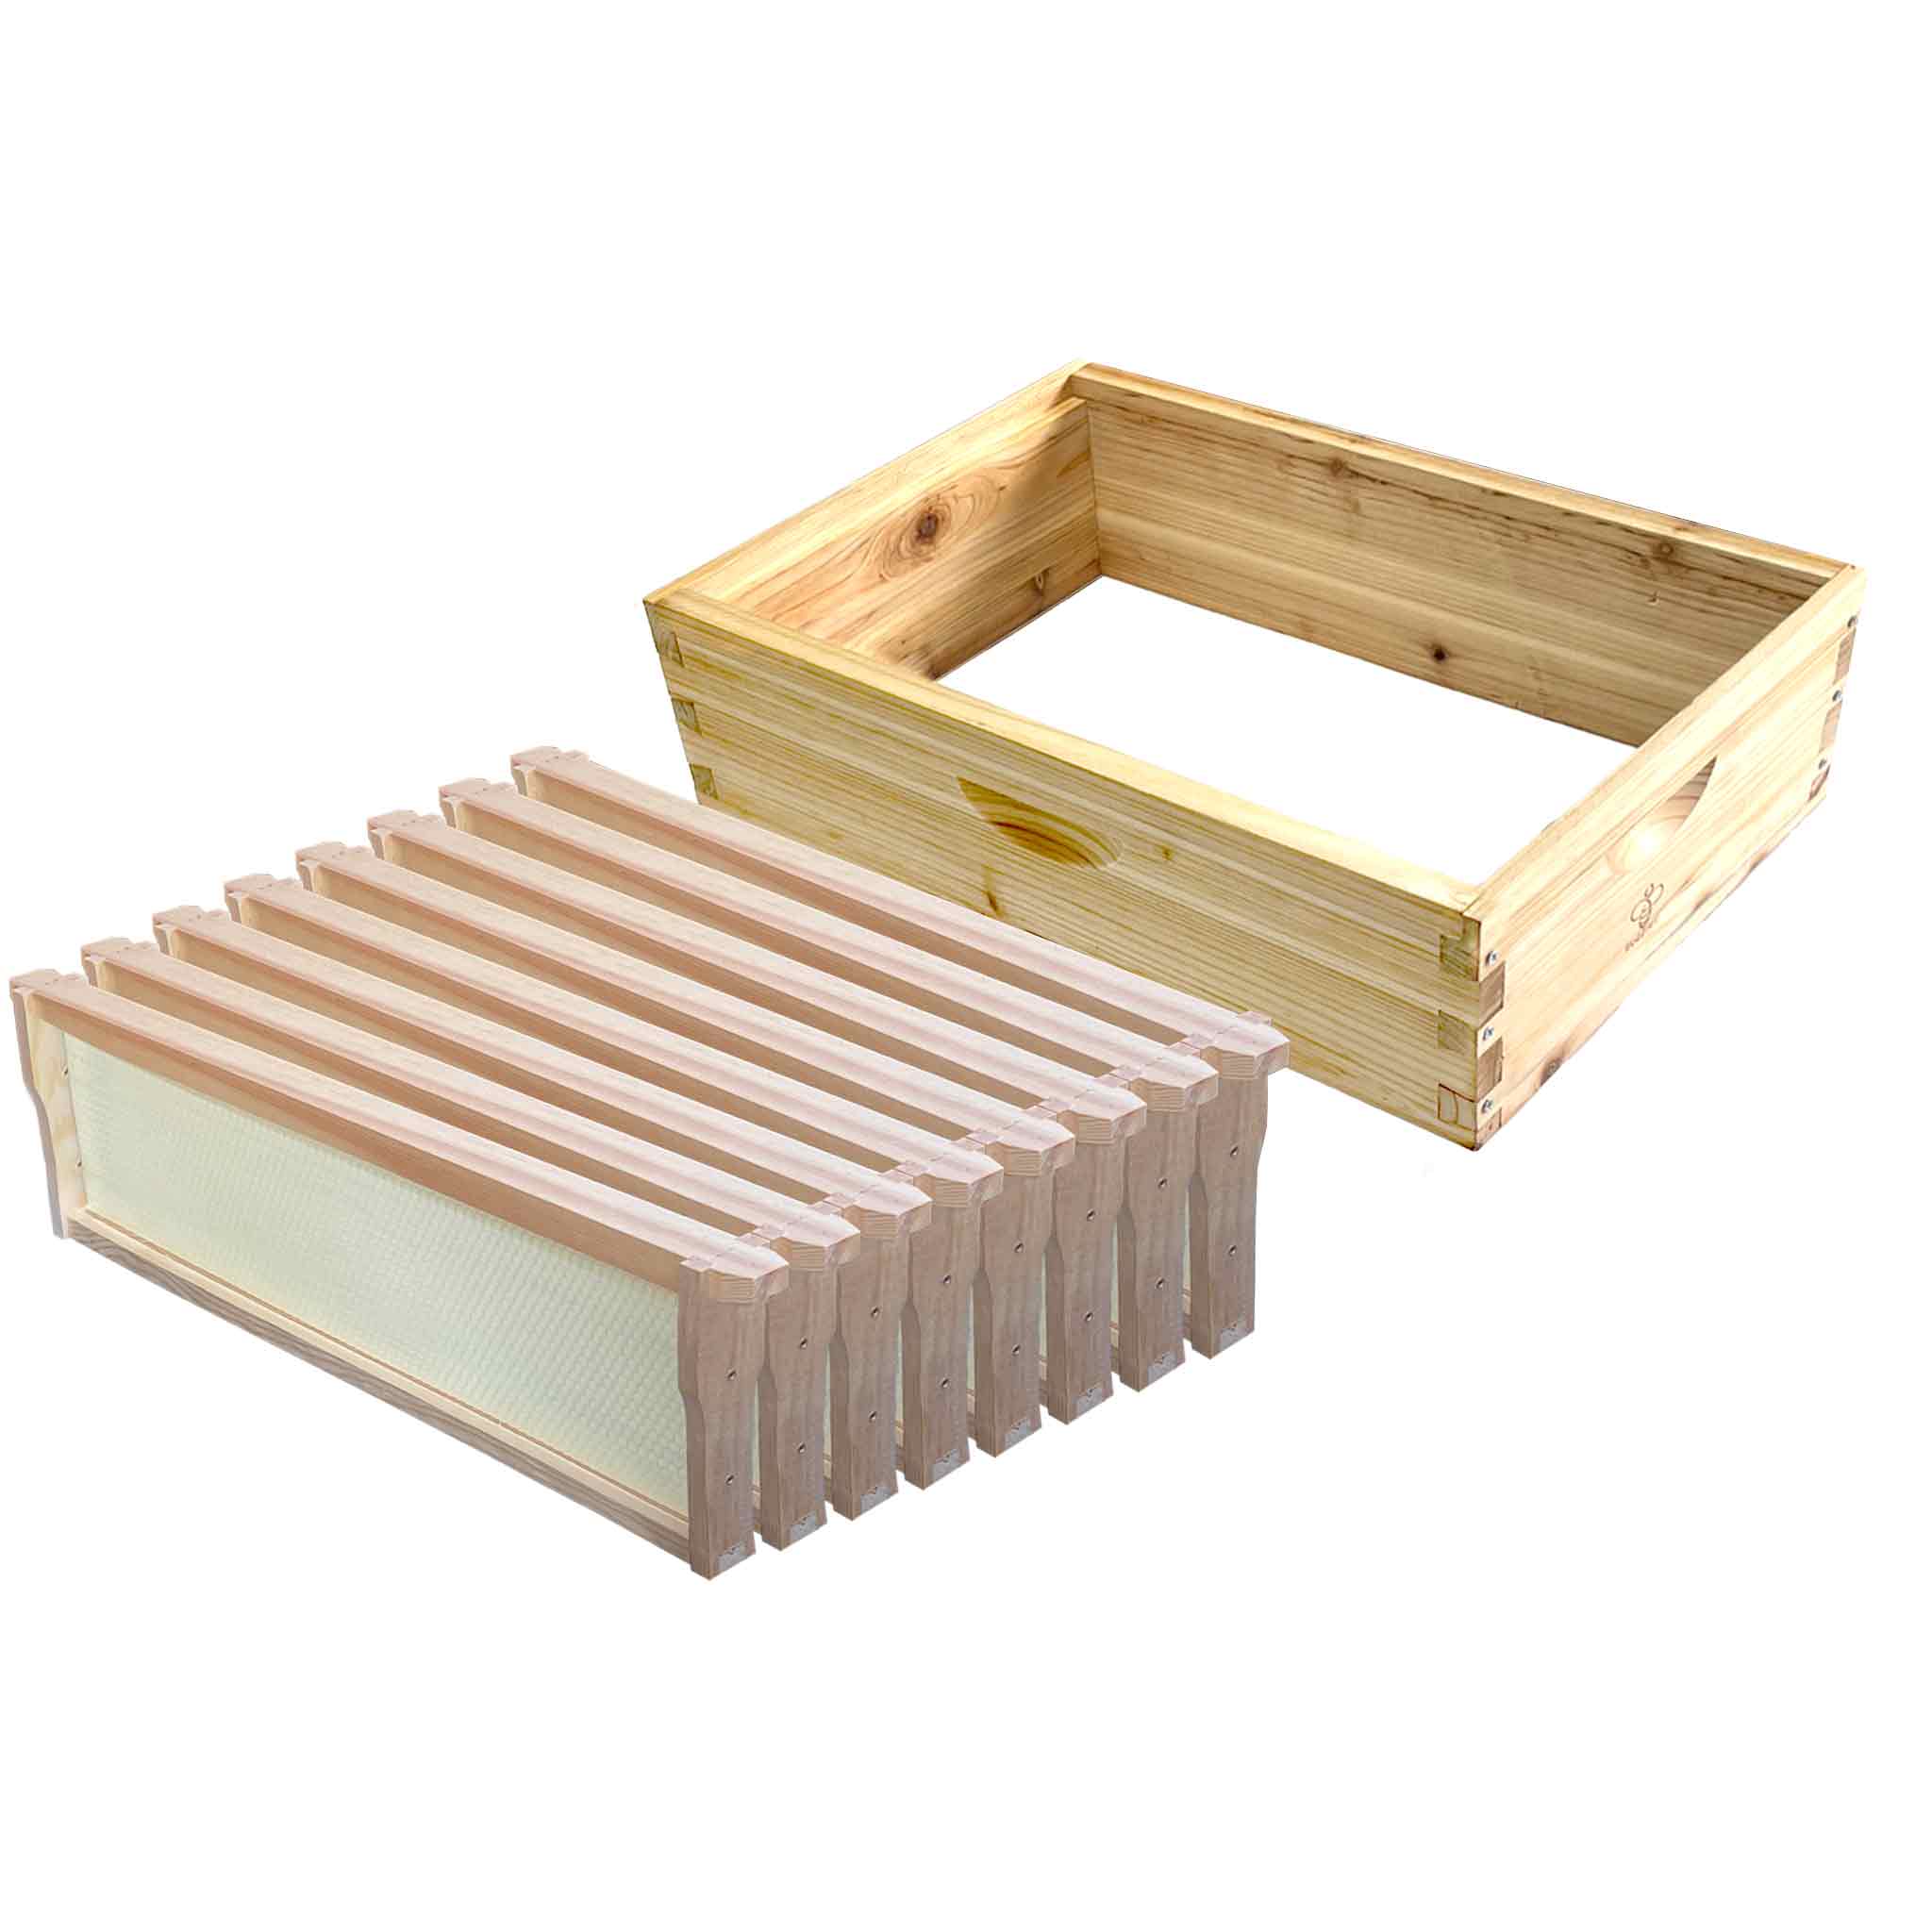 Ideal Size Box Super Add-on Kit - Hive Parts Kits collection by Buzzbee Beekeeping Supplies